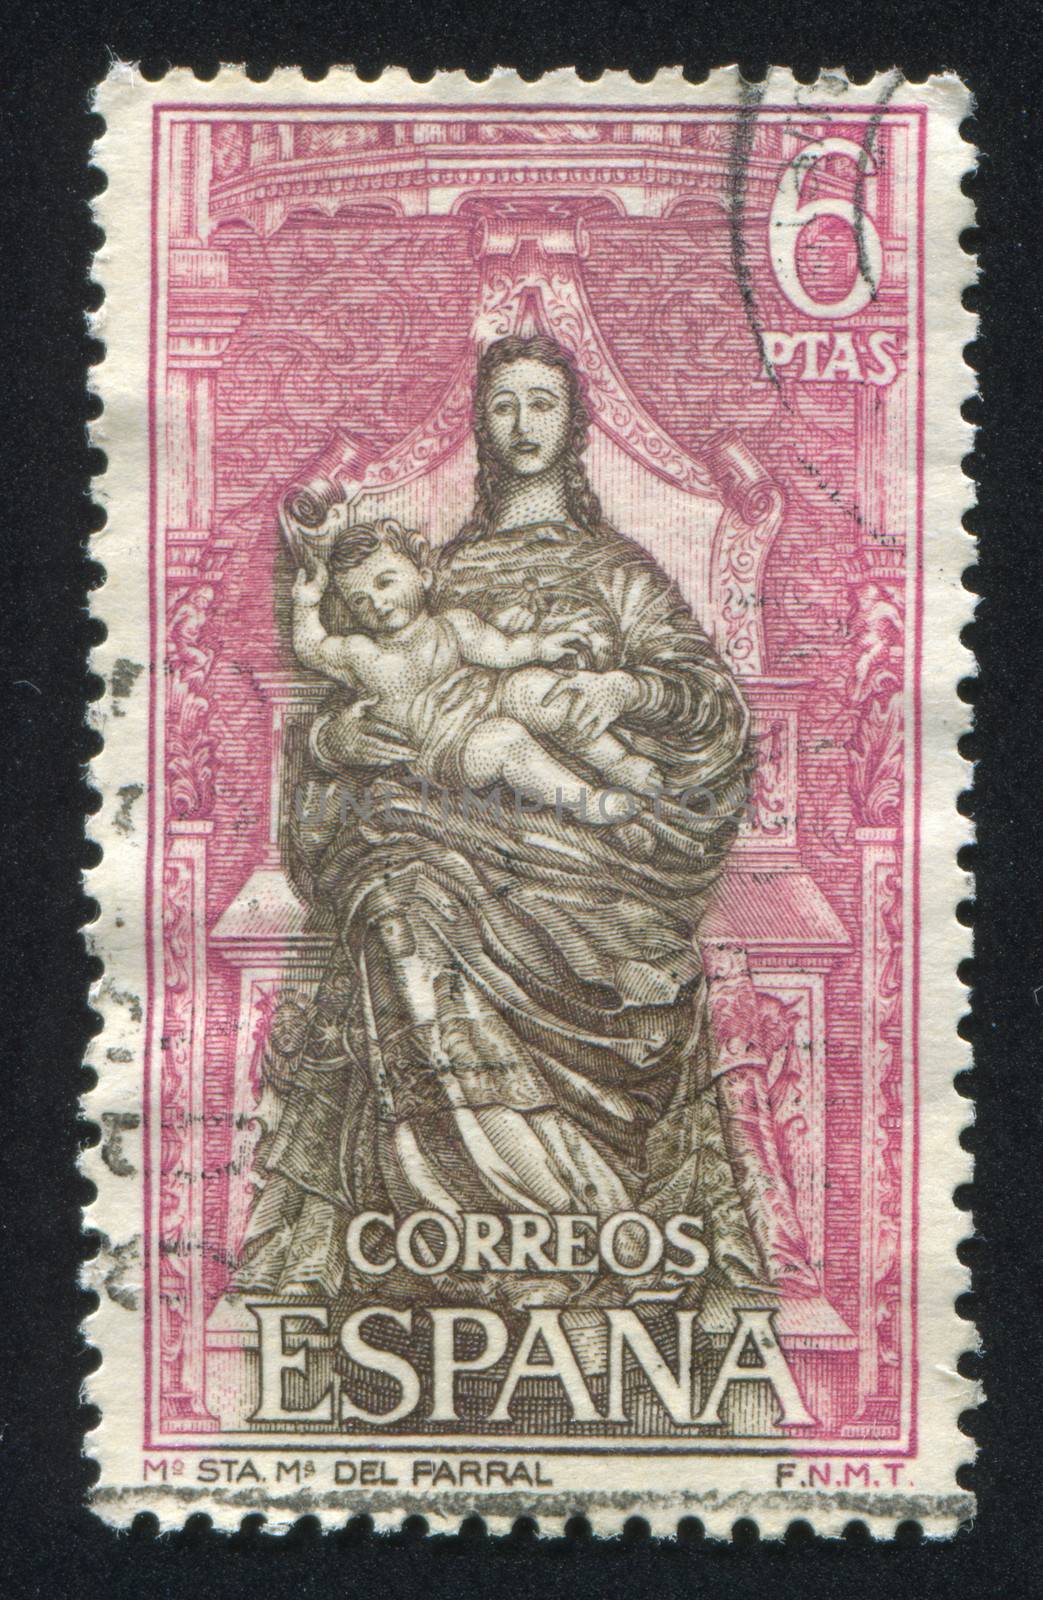 SPAIN - CIRCA 1968: stamp printed by Spain, shows Madonna and Child, statue from main altar, circa 1968